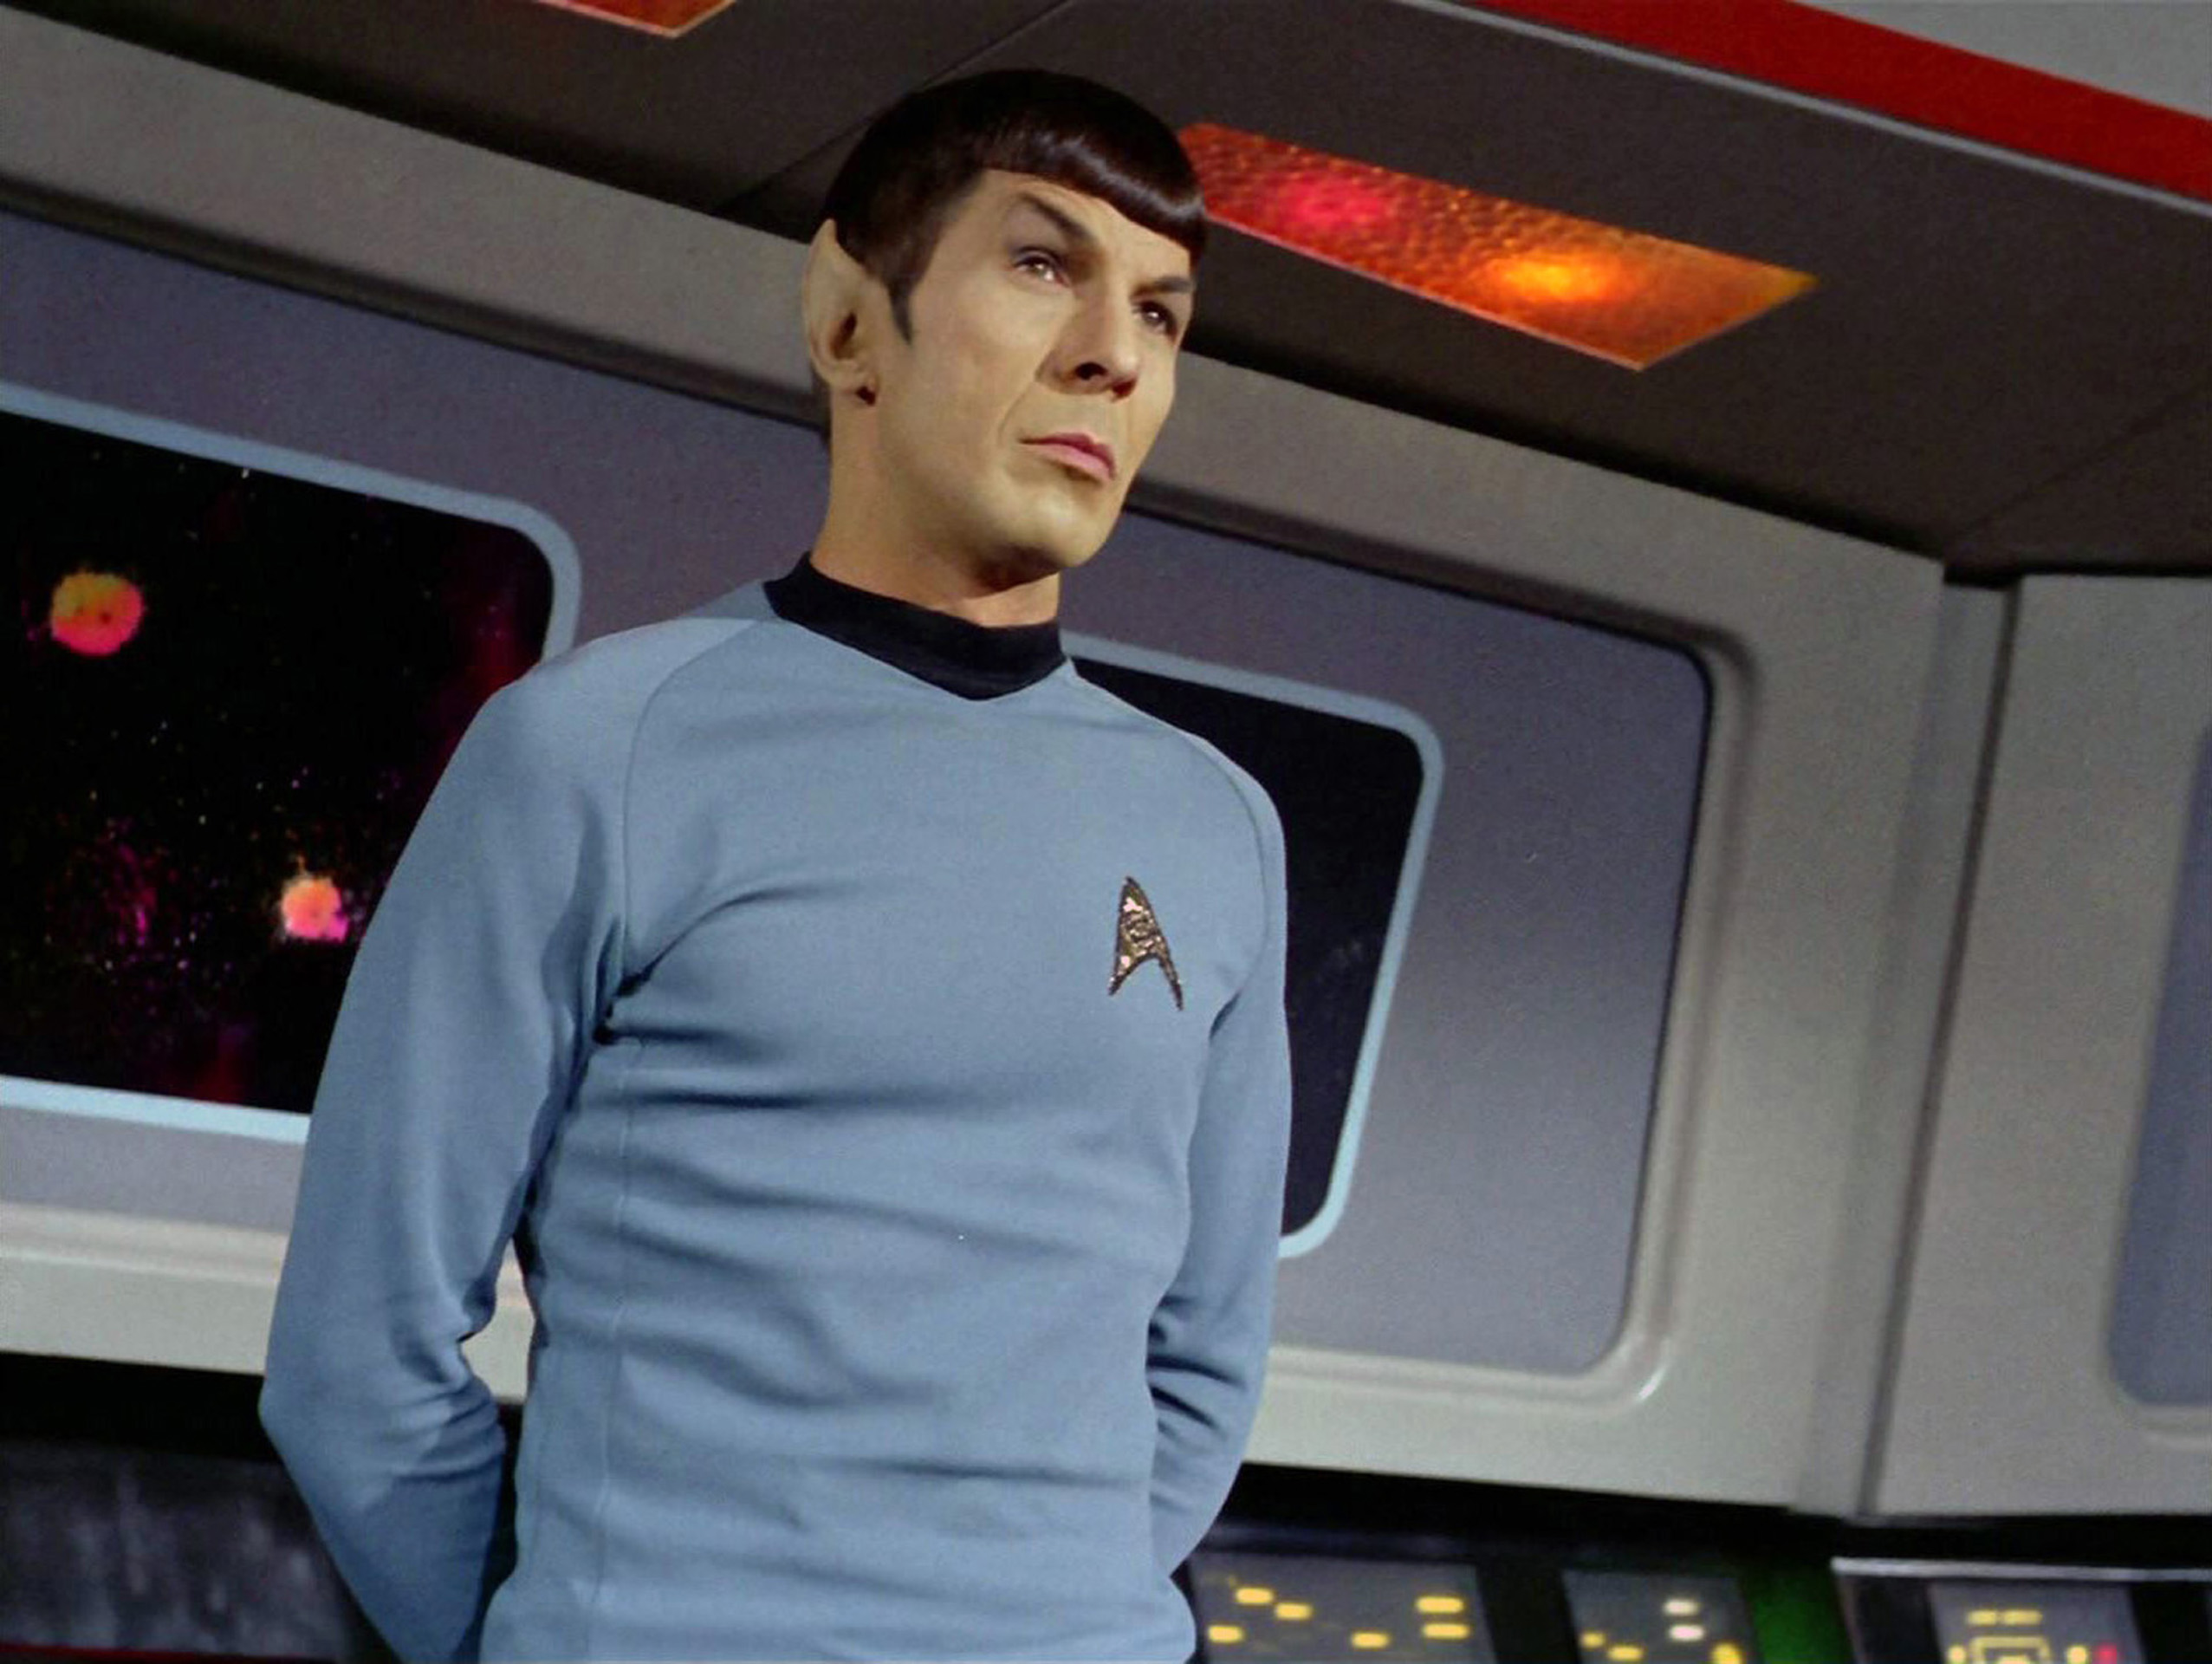 Leonard Nimoy as Mr. Spock in the STAR TREK episode, "Spock's Brain." which aired on Sept. 20, 1968. (CBS/Getty Images)